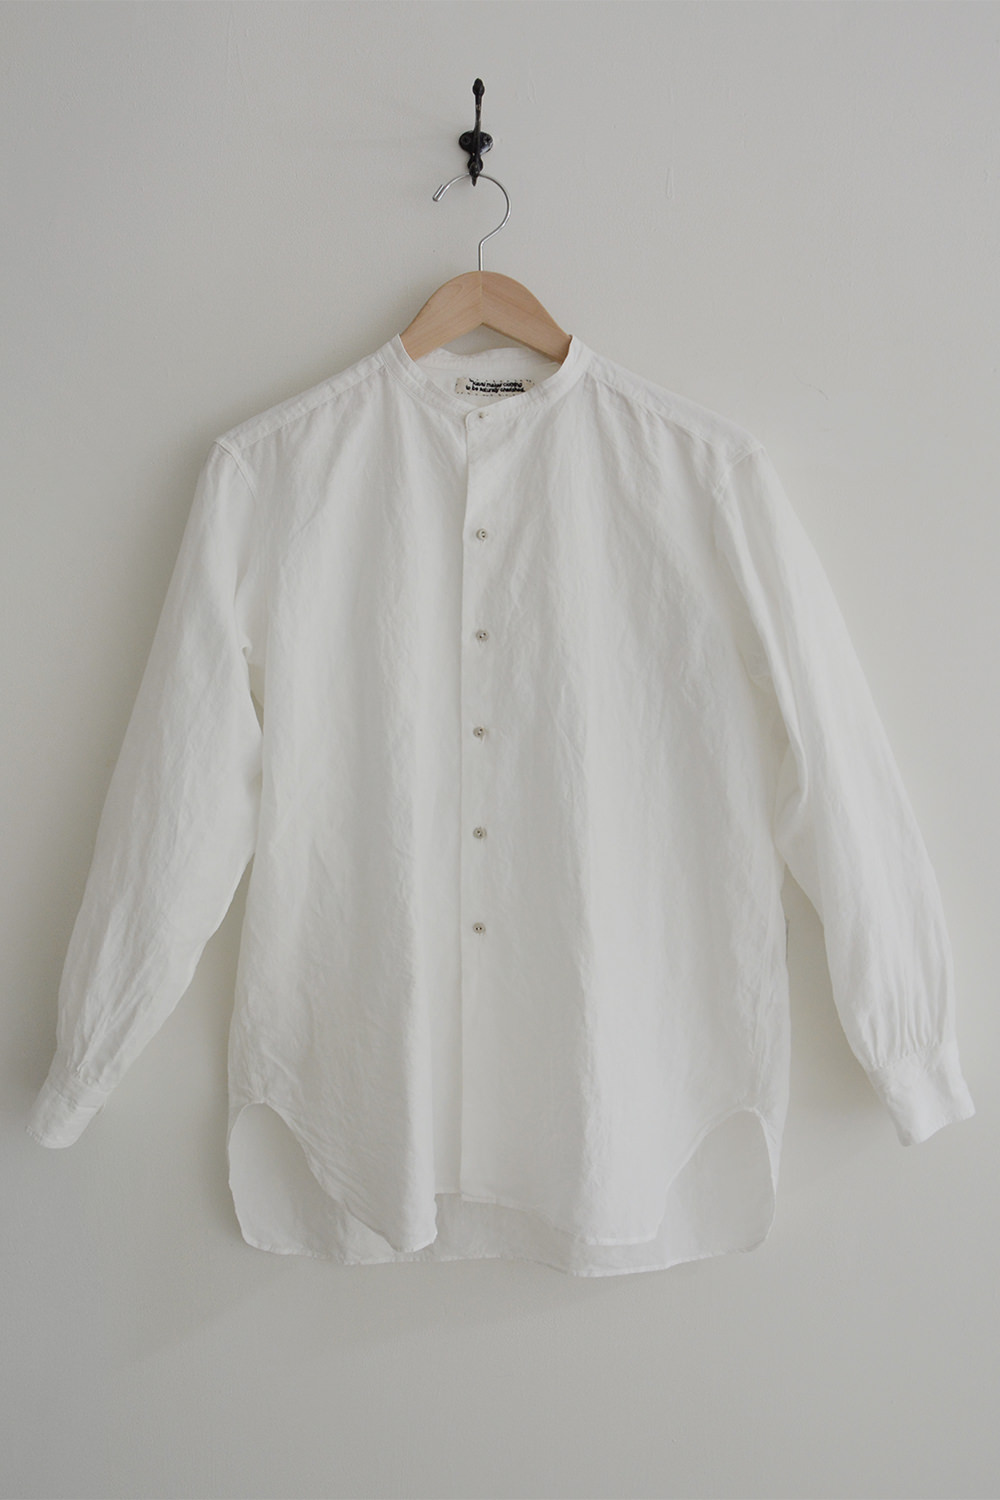 Kaval Linen Stand Collar Shirt White with Mashiko Ceramic Buttons a Top Picture